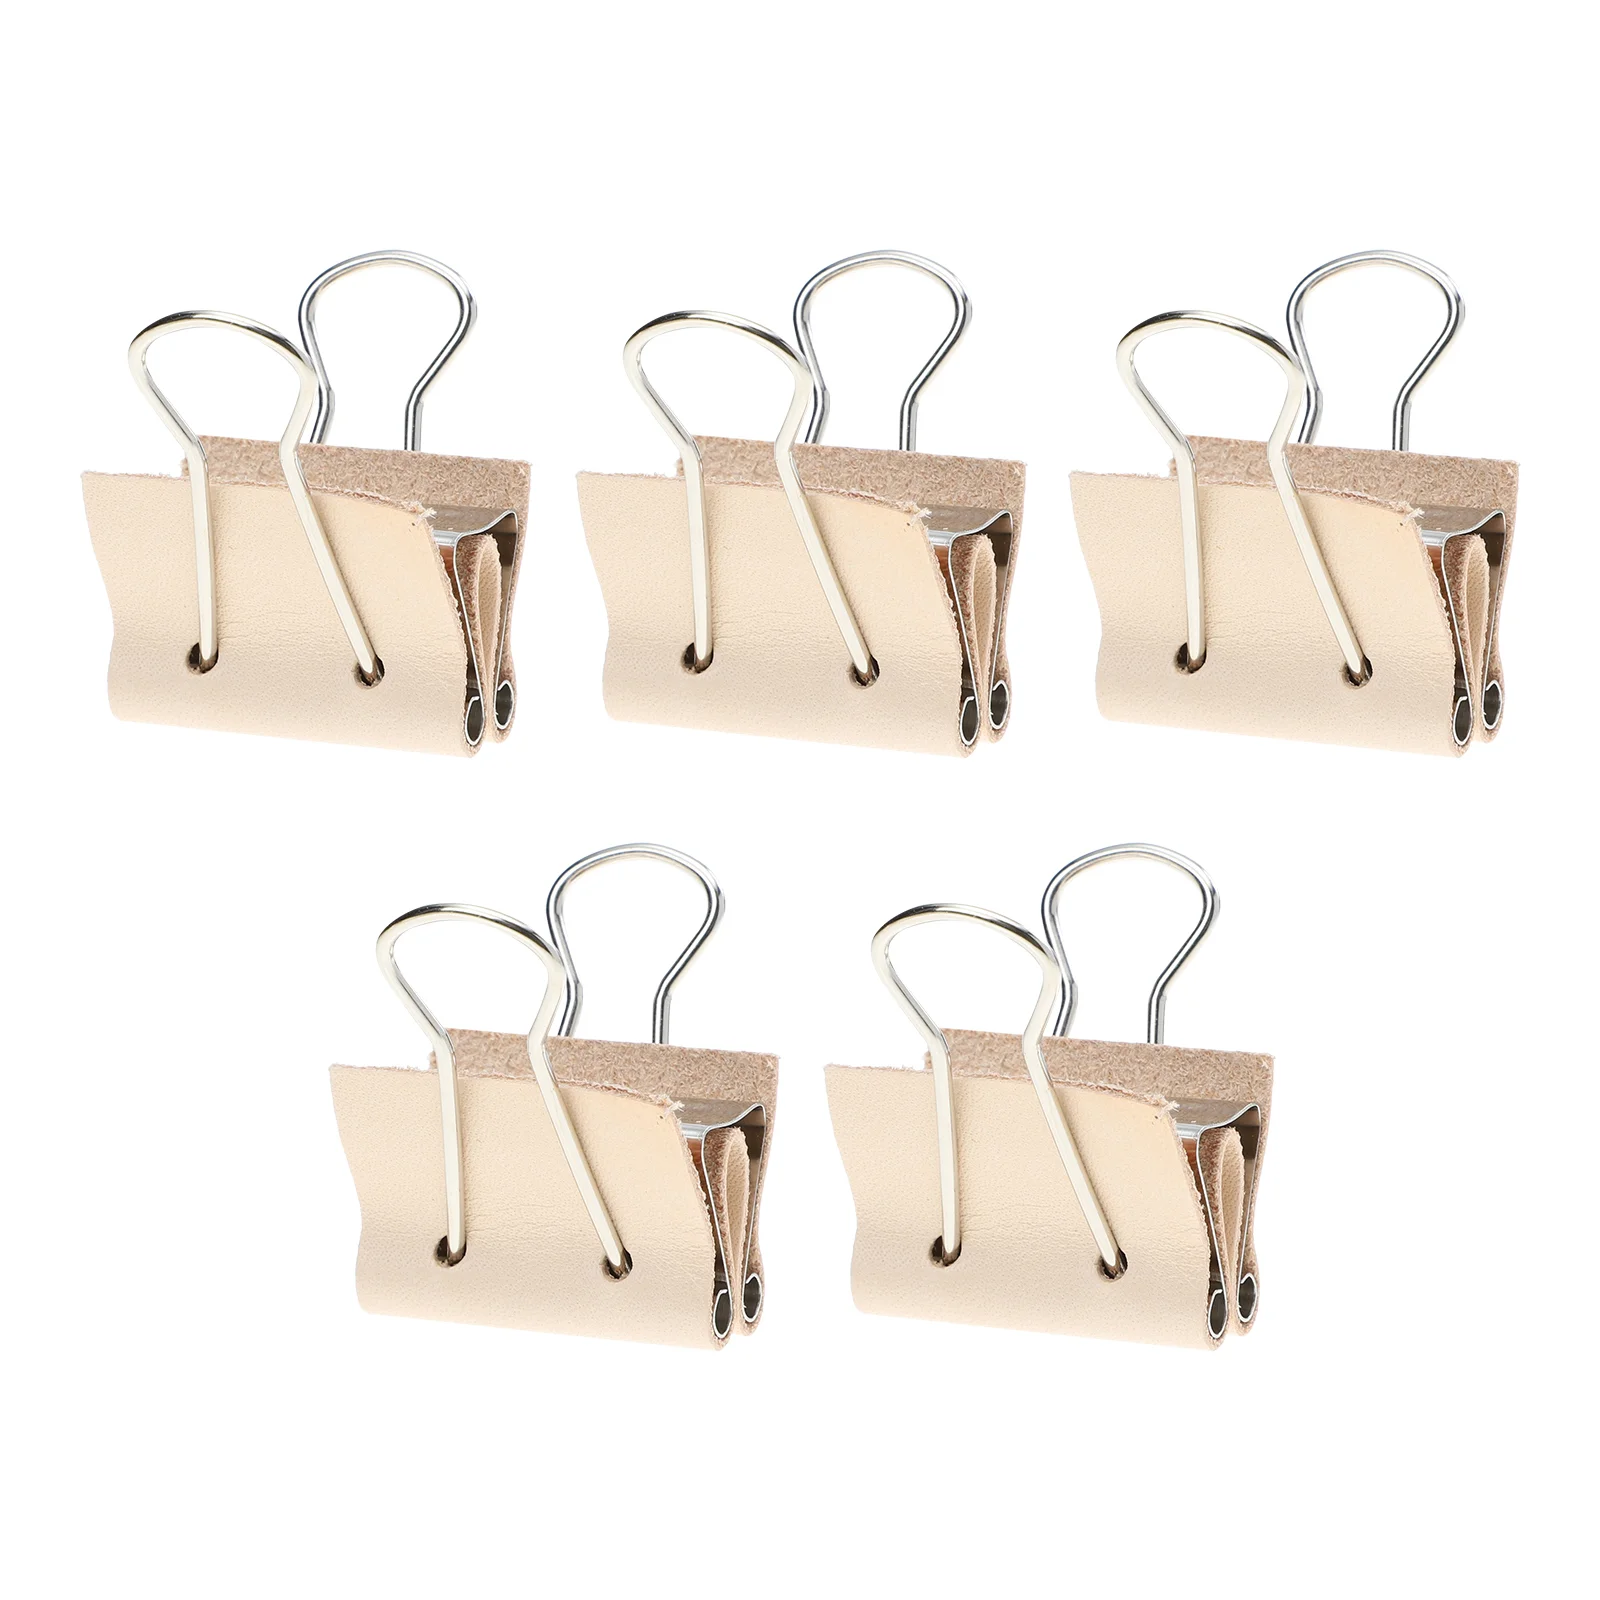 5pcs Binder Clamps DIY Binder Clamps DIY Binder Clamps 1 5 10pcs 2inch spring clamps diy woodworking tools plastic nylon clamps for woodworking spring clip photo studio background